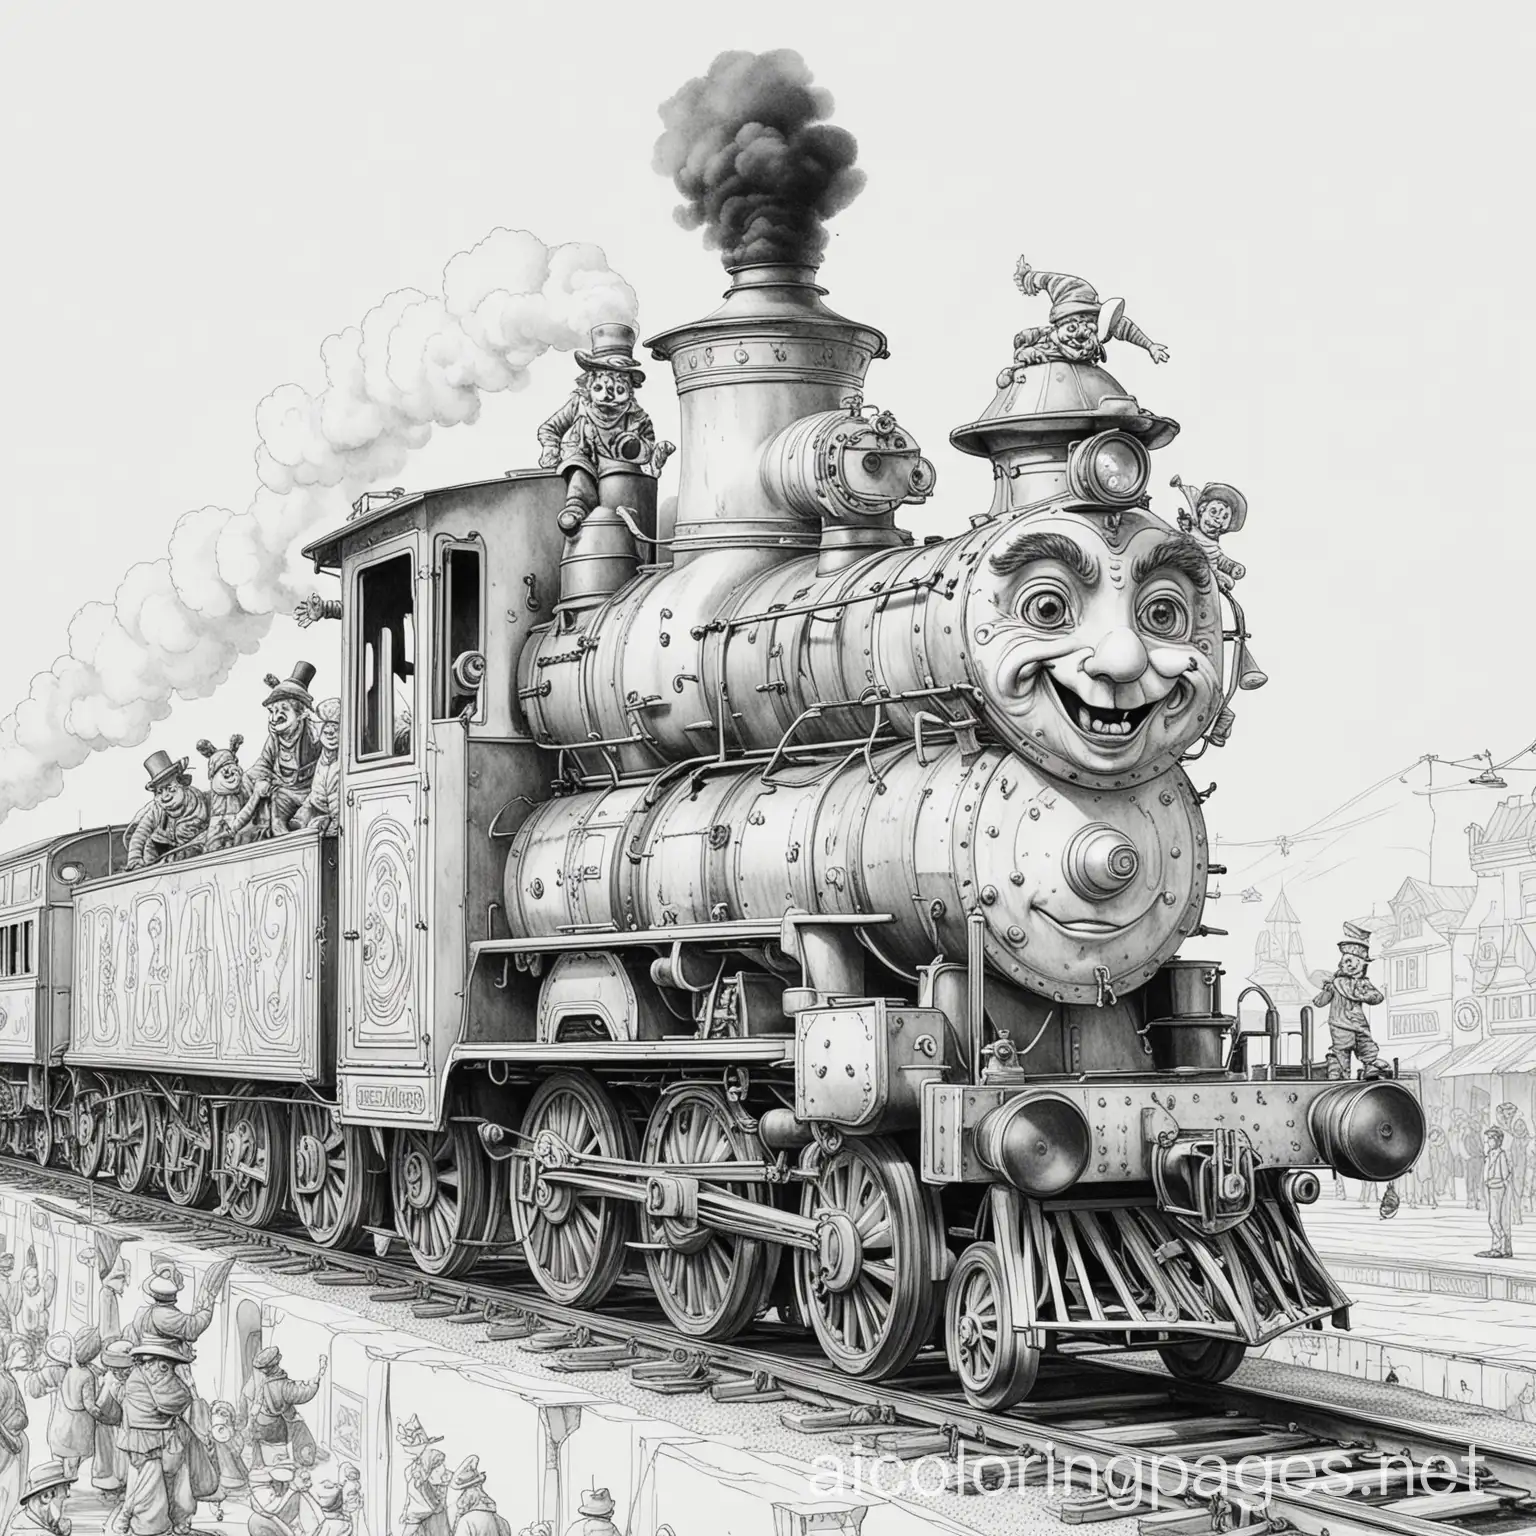 circus steam train in the station with clowns on the side looking down from the top, Coloring Page, black and white, line art, white background, Simplicity, Ample White Space. The background of the coloring page is plain white to make it easy for young children to color within the lines. The outlines of all the subjects are easy to distinguish, making it simple for kids to color without too much difficulty